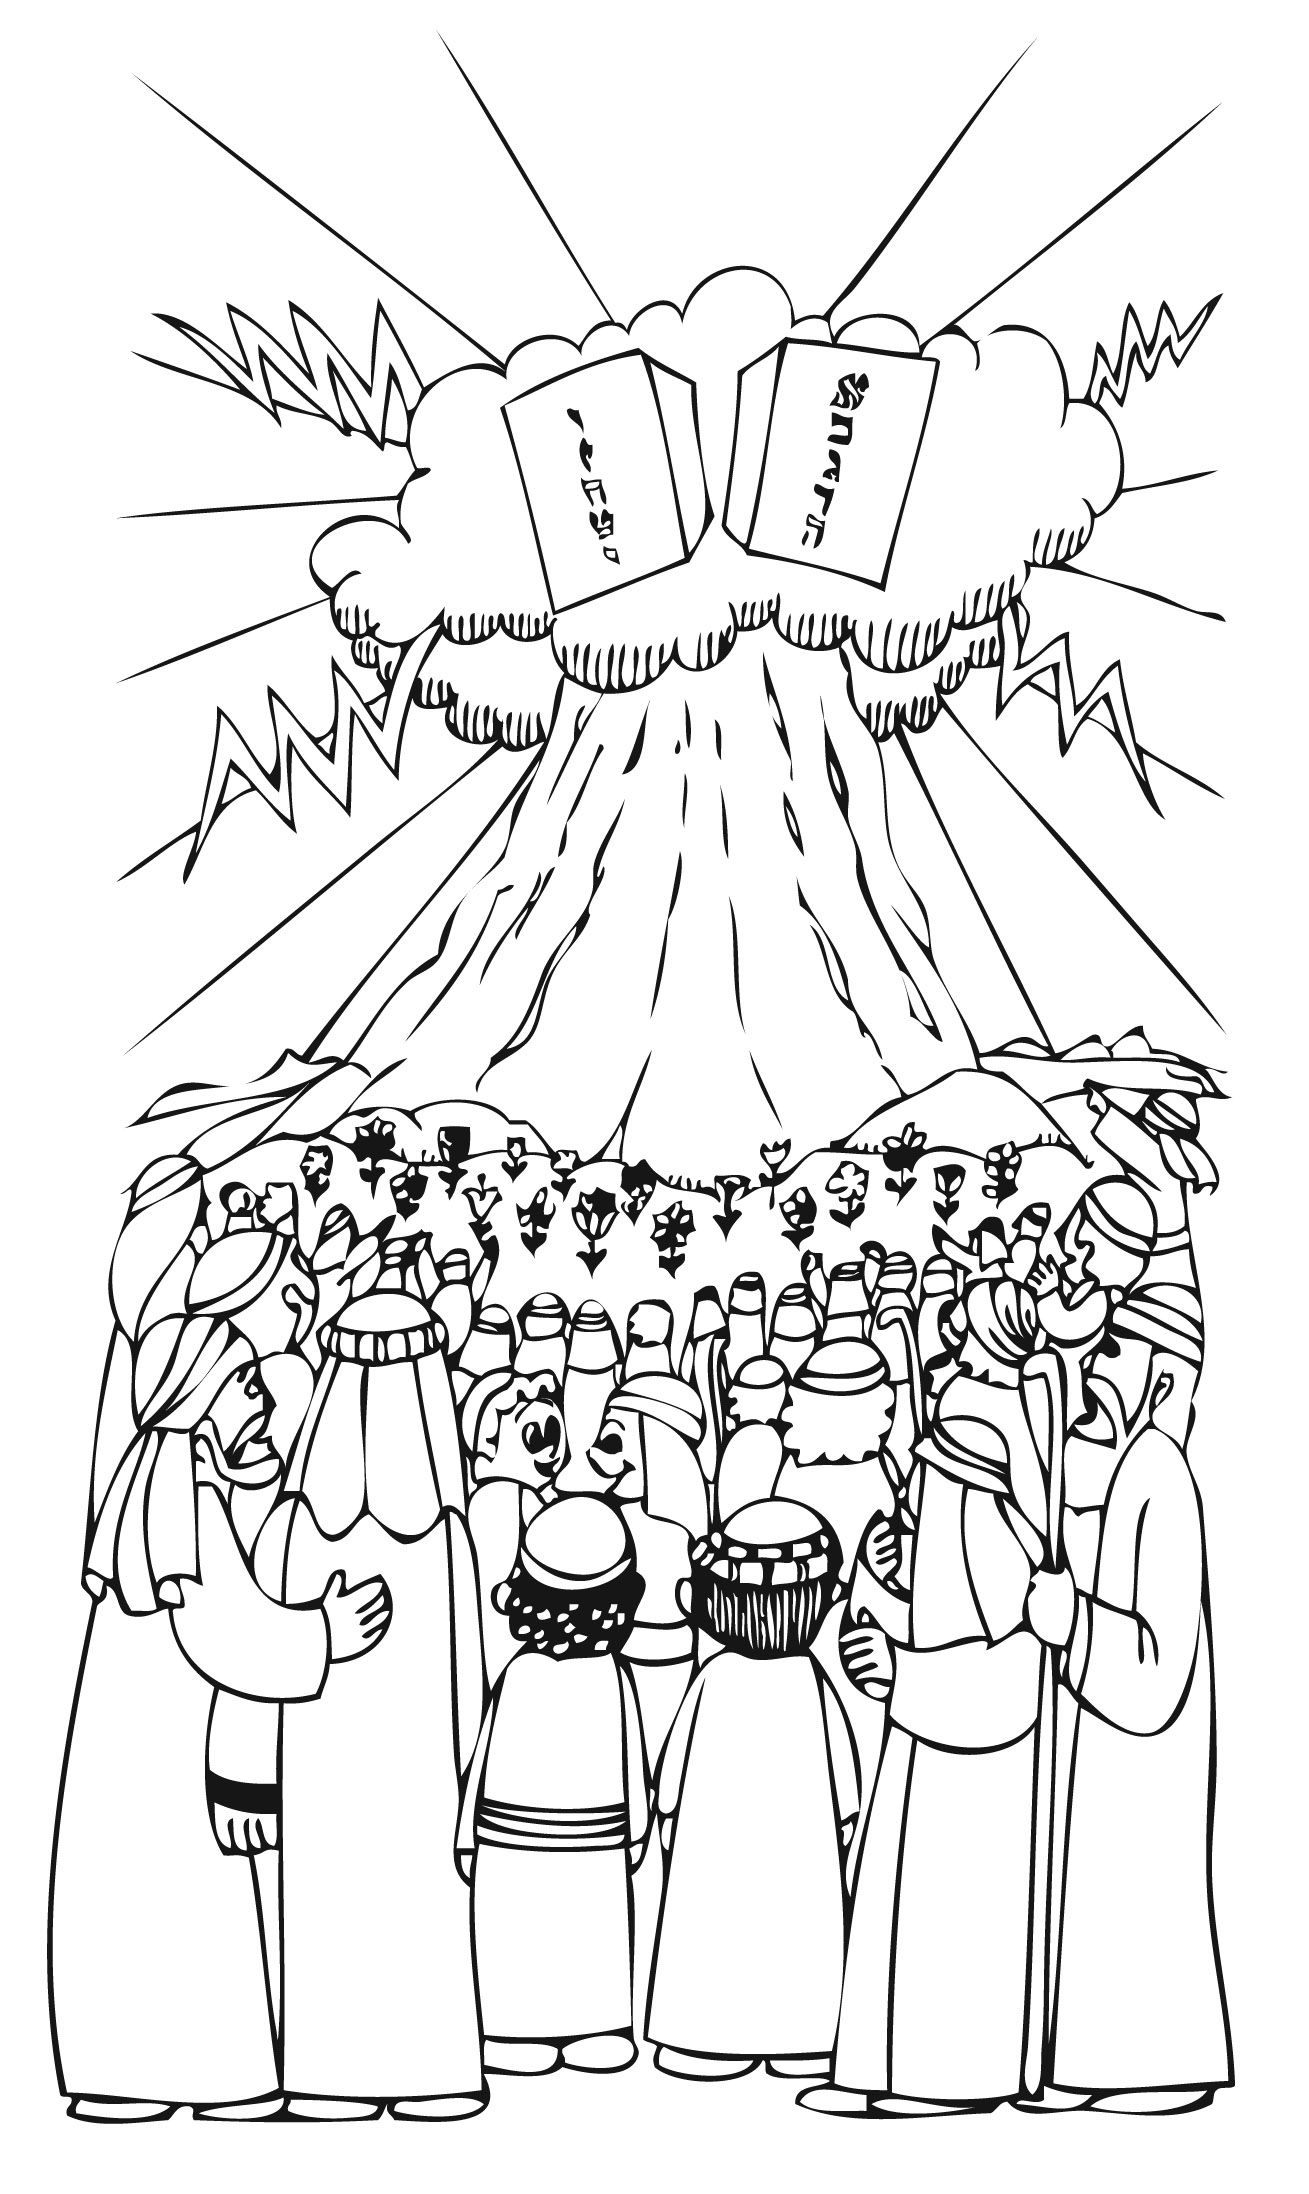 Coloring sheet the jews standing around mount sinai as they receive the mandments printable coloring pages coloring pages for kids coloring pages